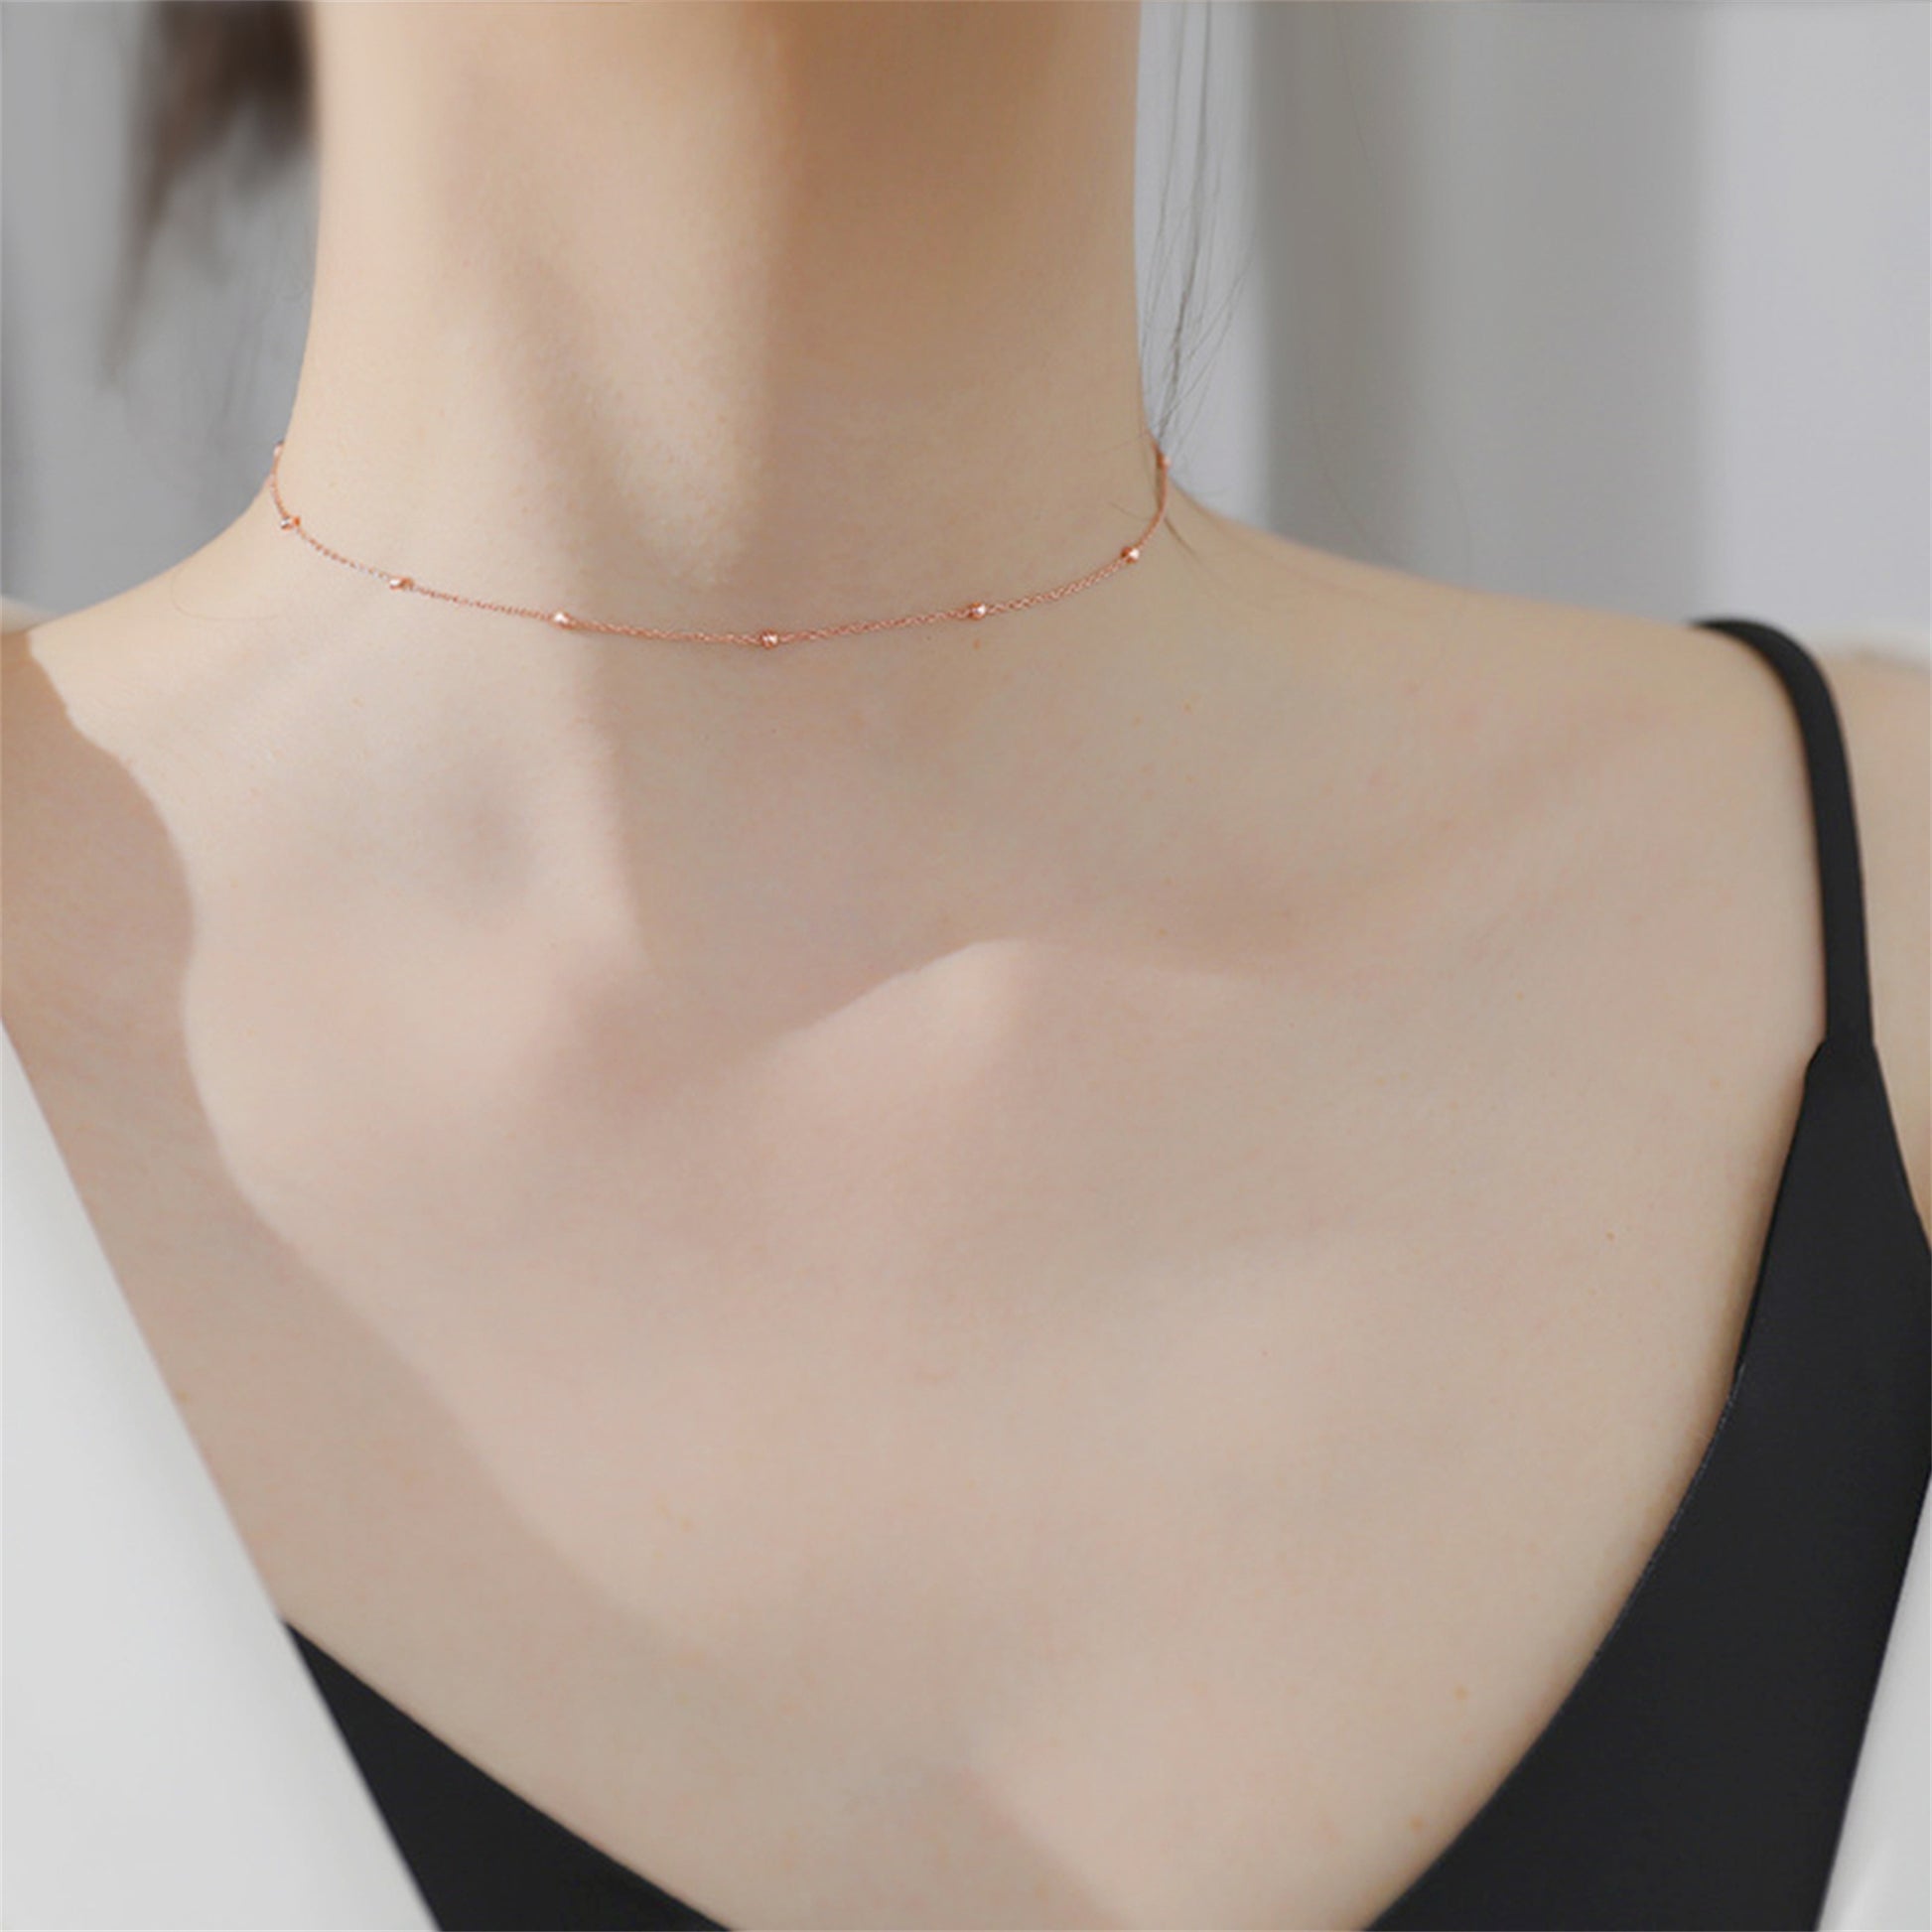 Sterling Silver Round Choker Necklace with 2mm Bobble Balls in 3 Tones - sugarkittenlondon